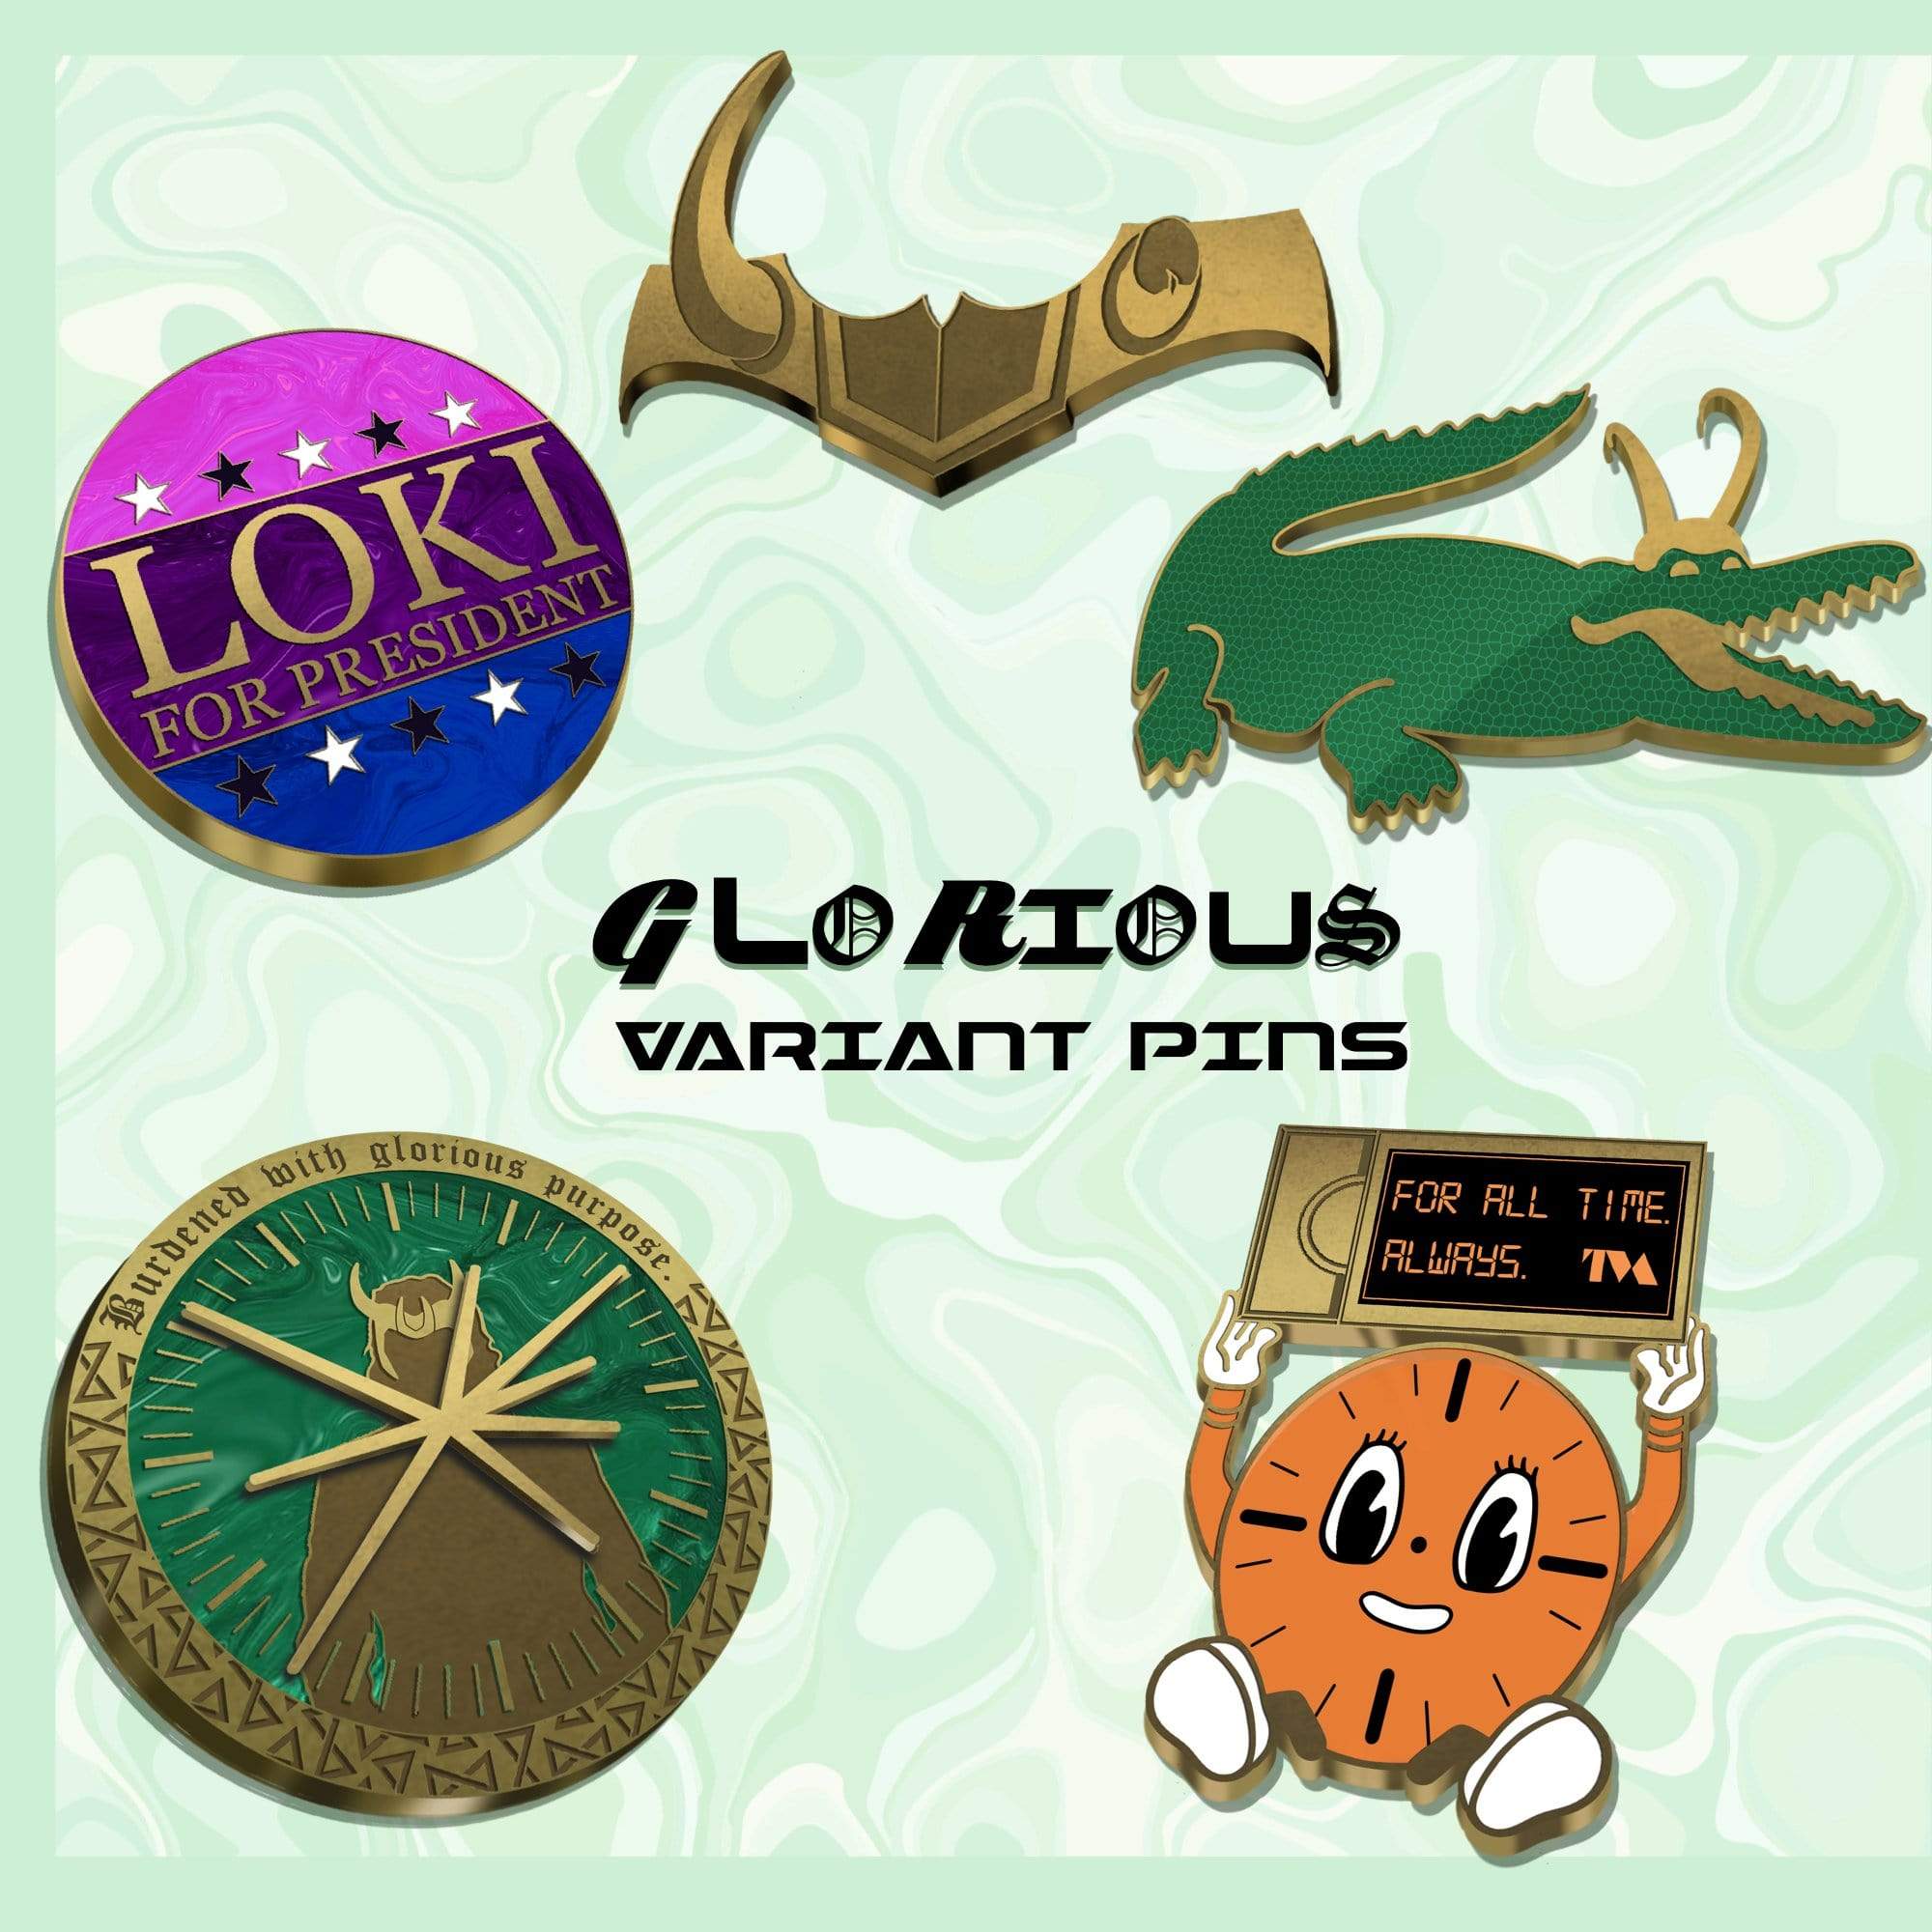 pinbuds Glorious 5 Pin Set For all time pin